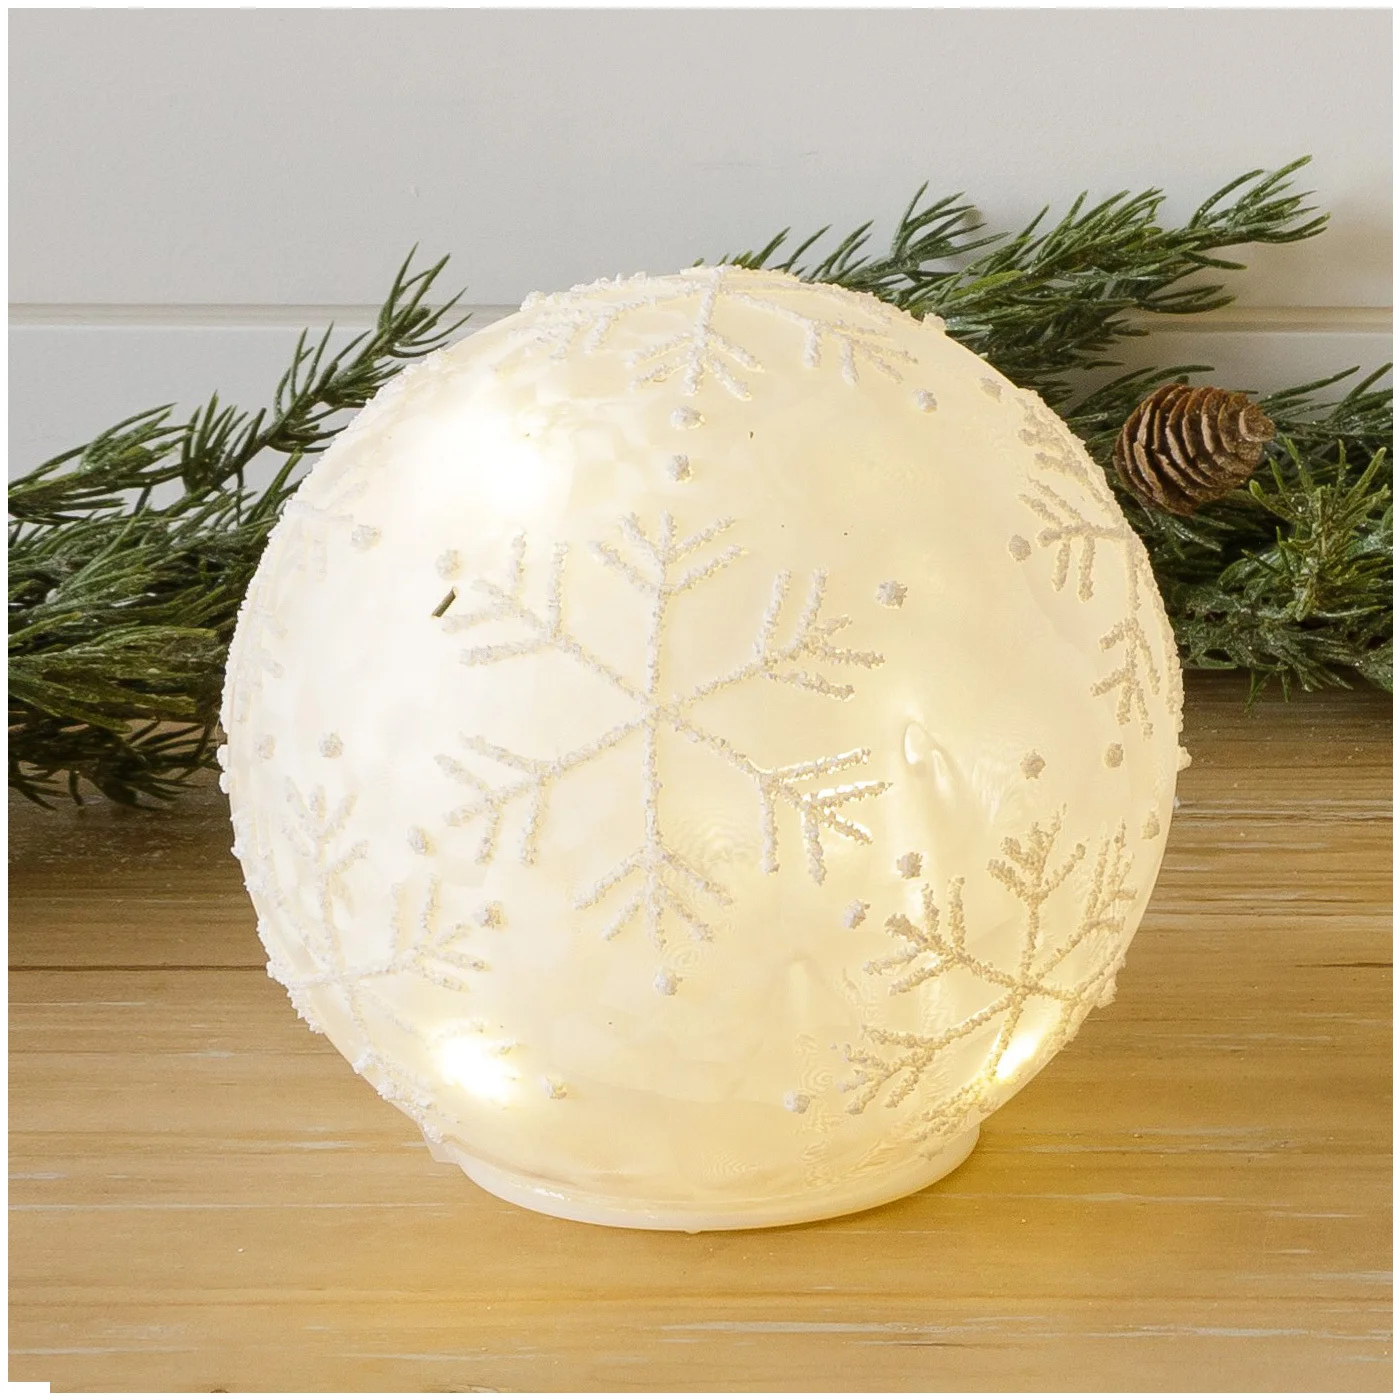 Snowflakes 6.5" Lighted Glass Ball Decoration